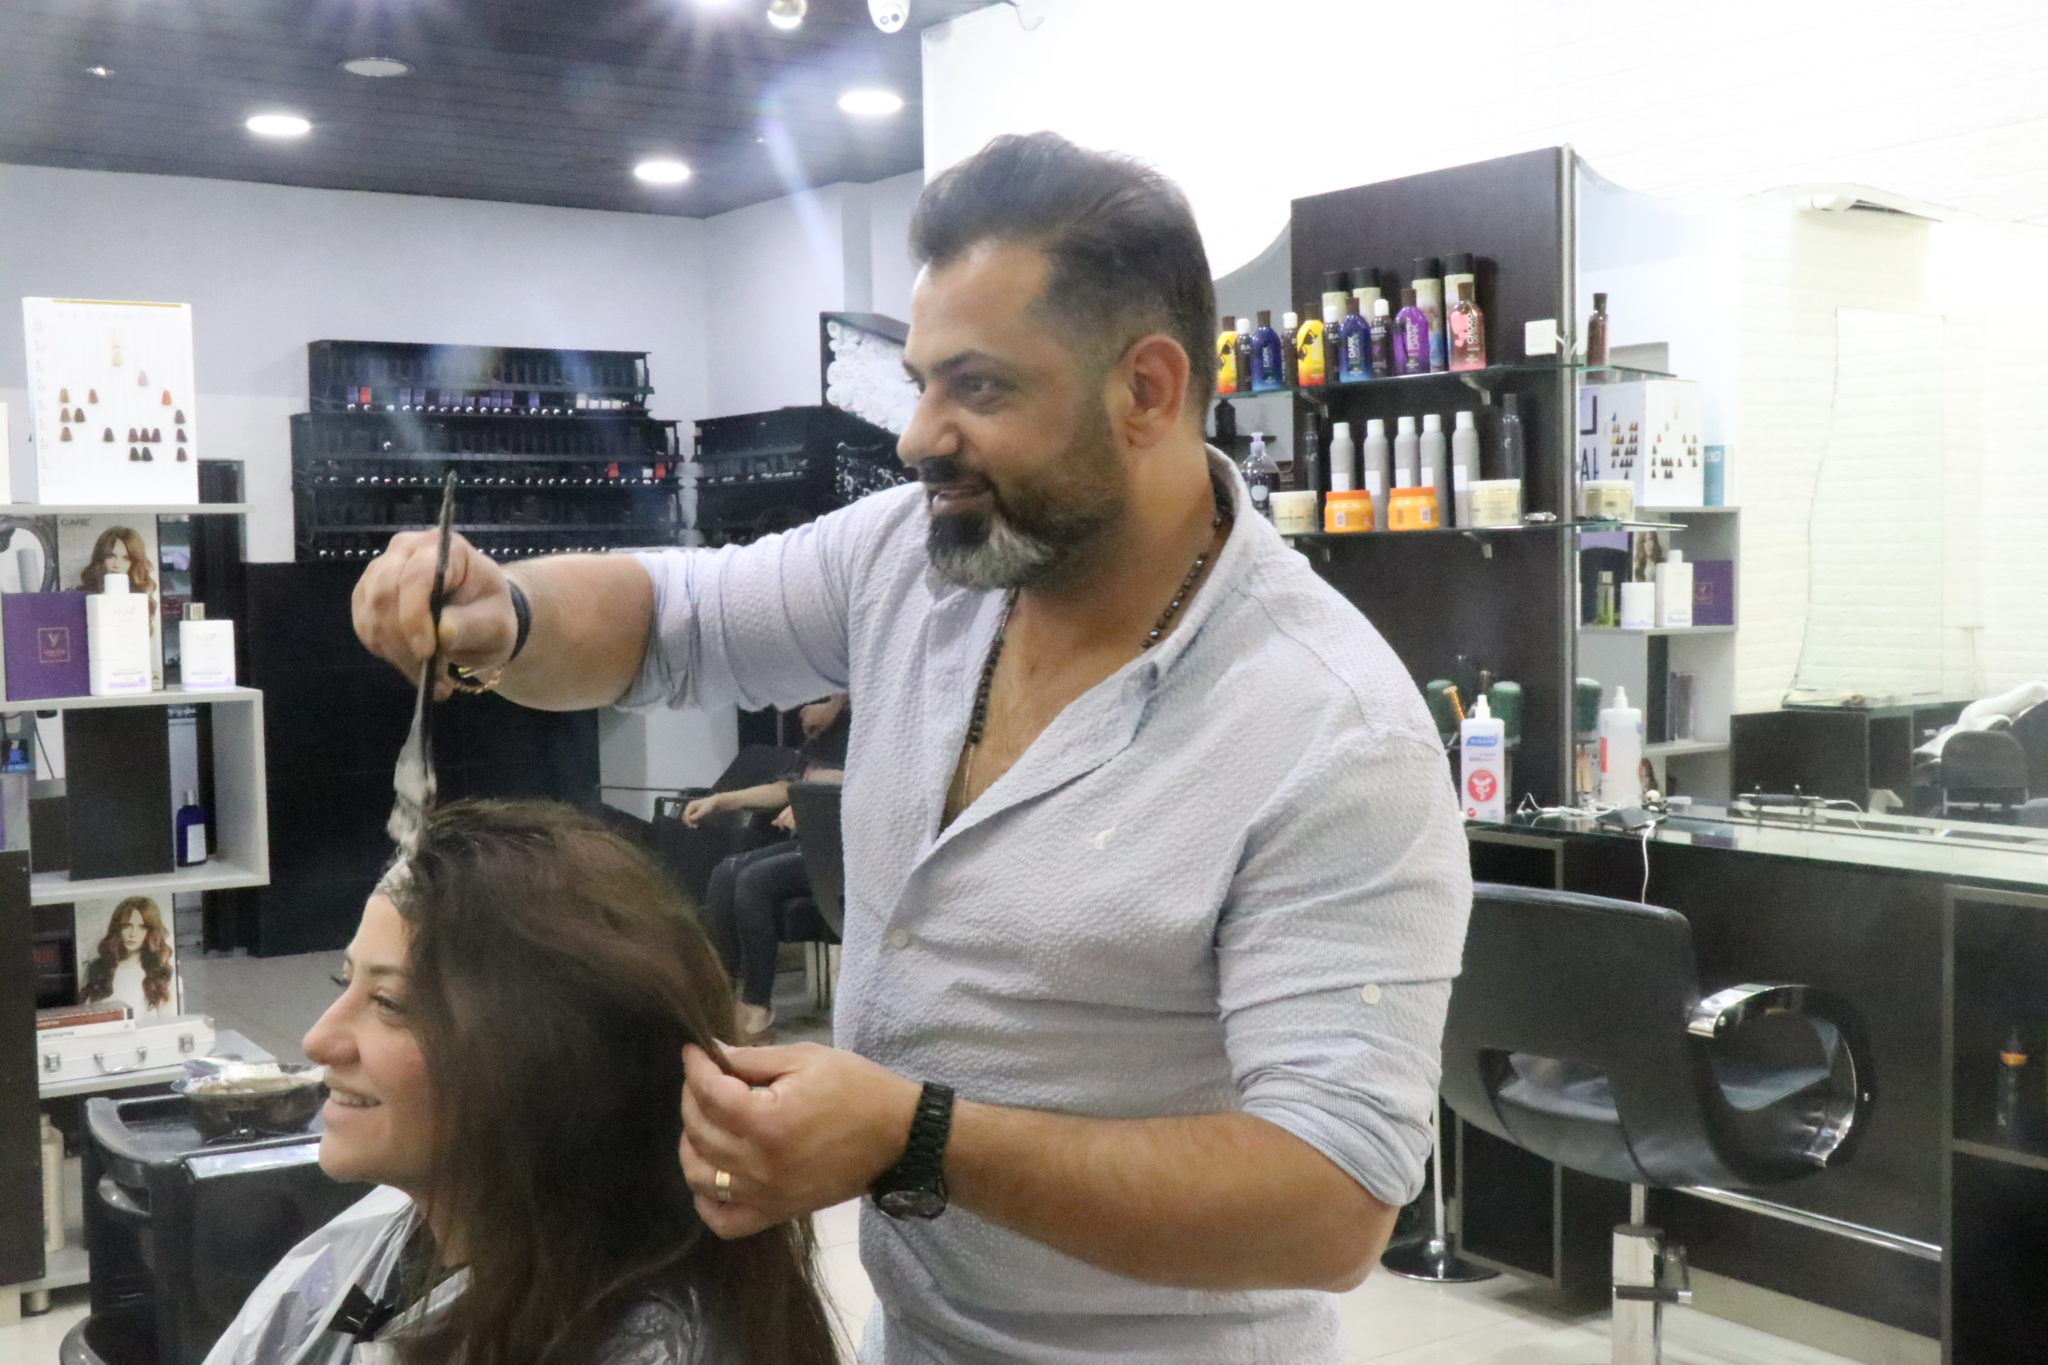 Houssam, stylist and owner of Houssam Salon in Baysour, Lebanon.